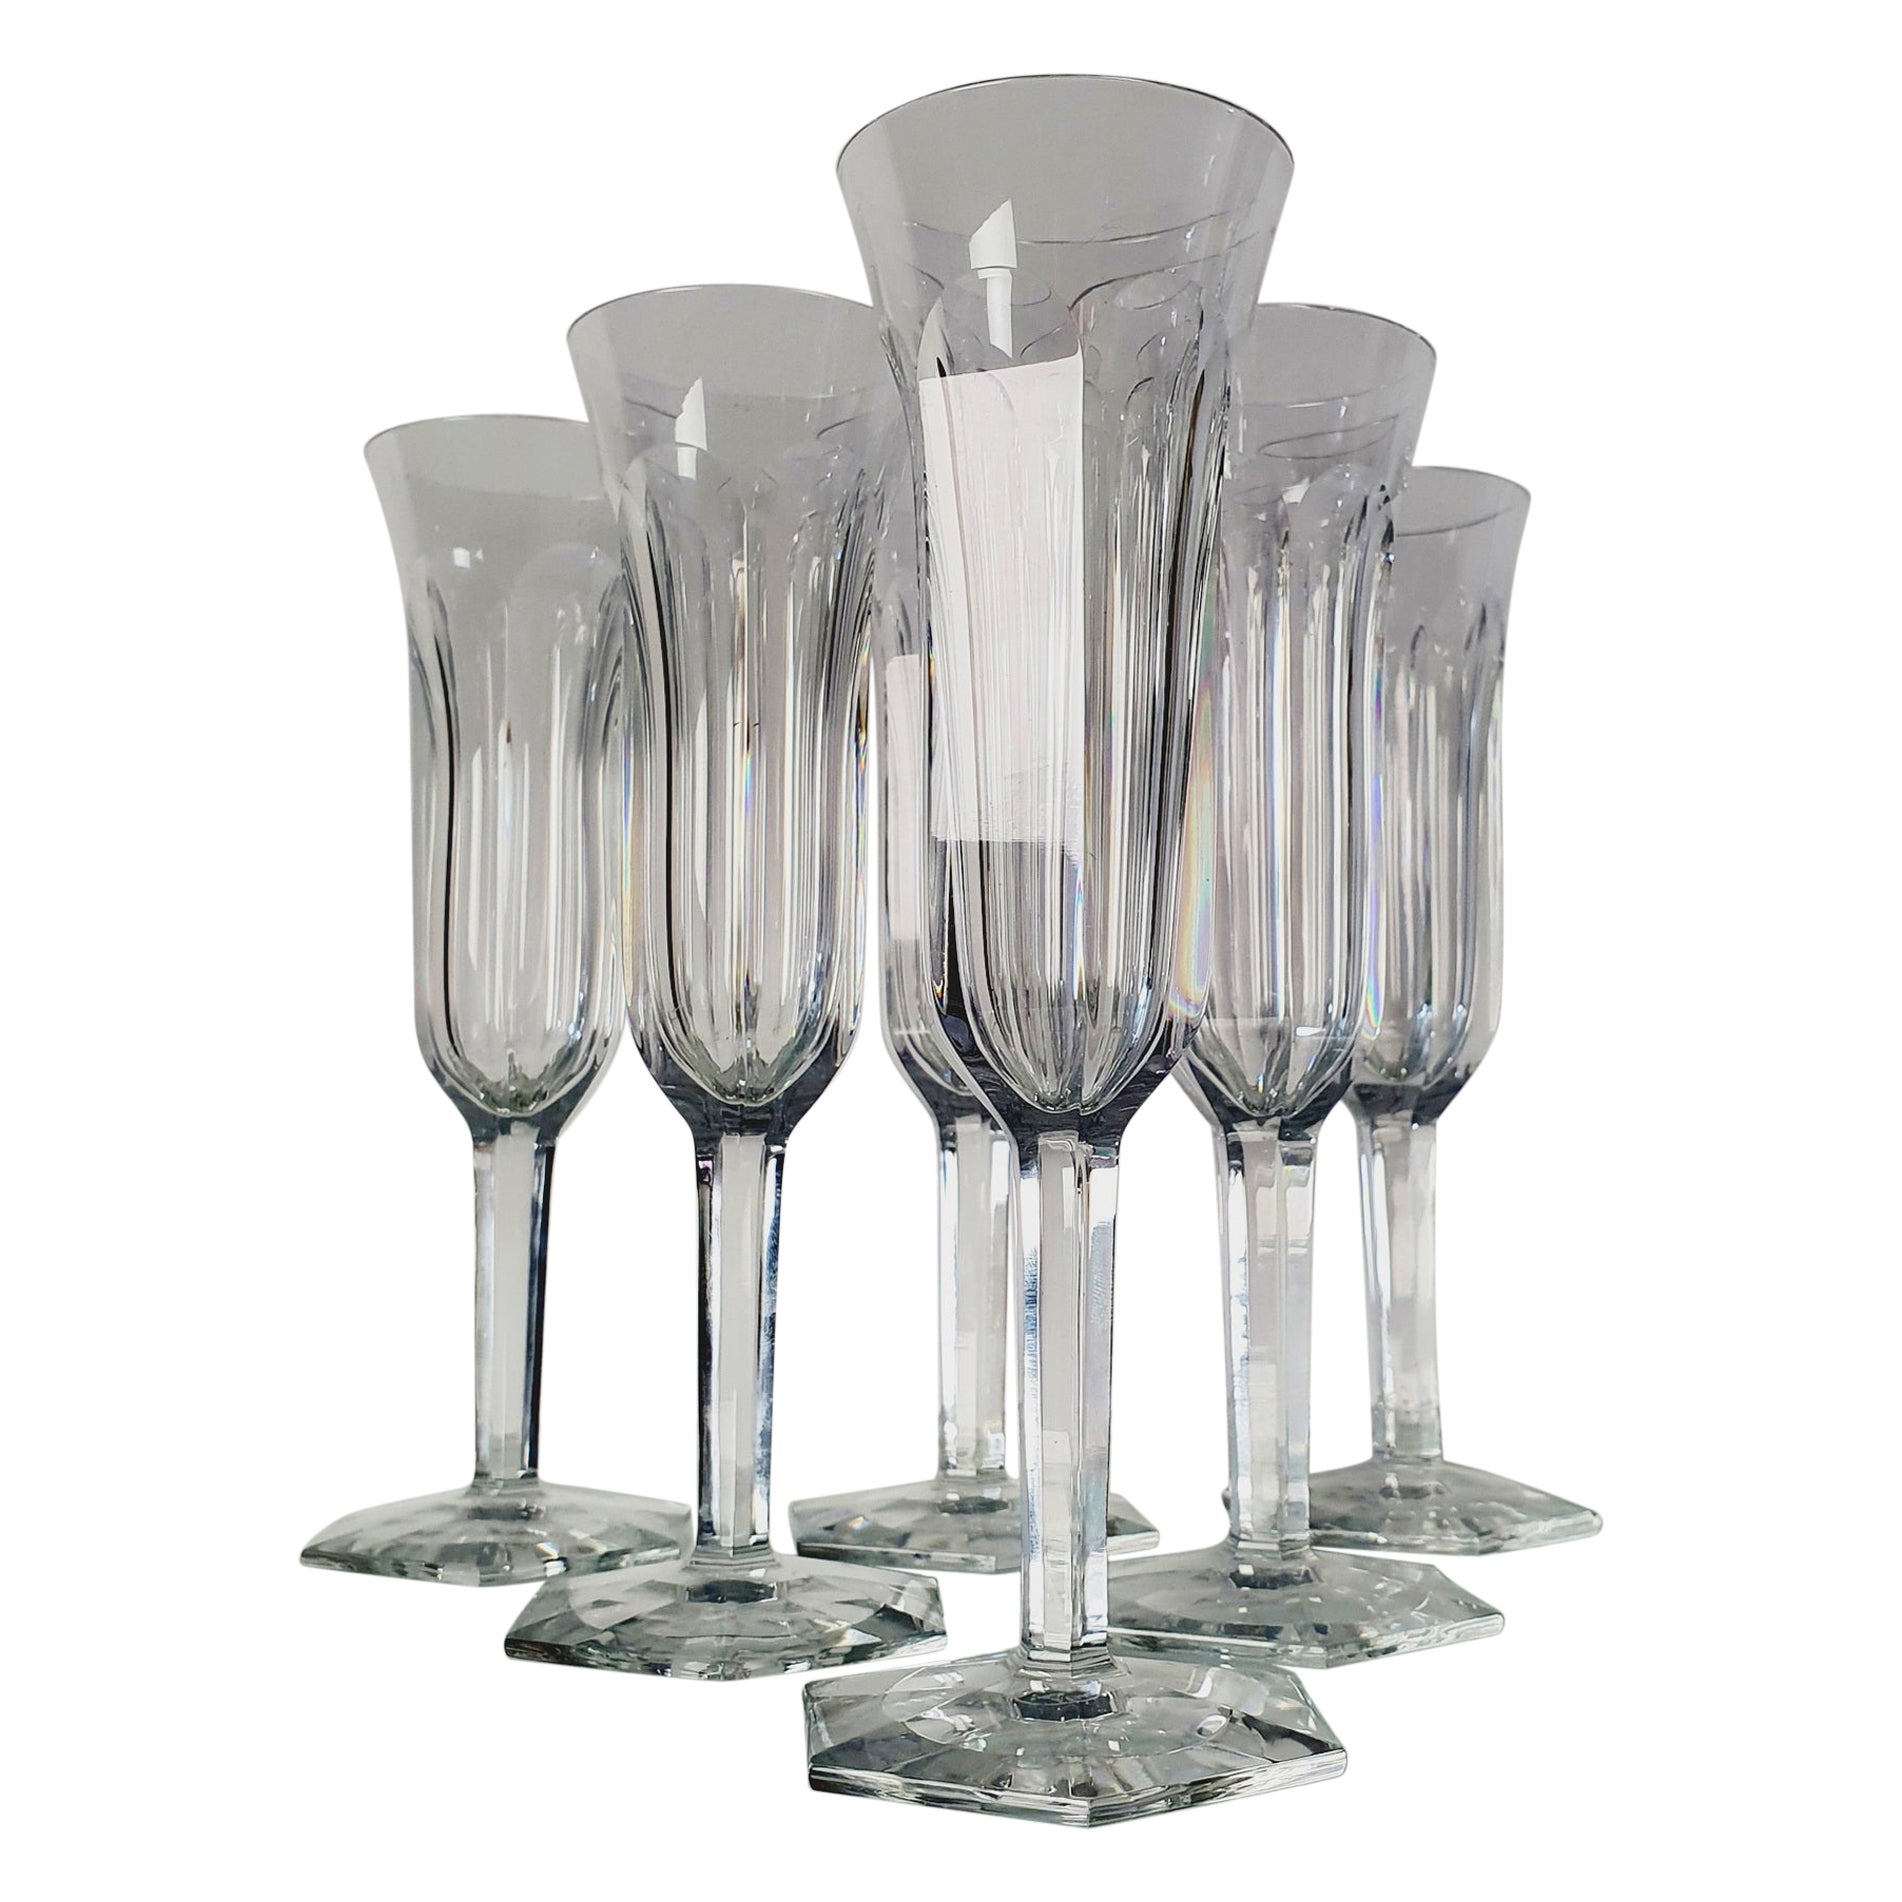 Beautifully Designed Hand Blown Champagne Glasses Standard Champagne Flute 100% Lead Free Premium Quality Crystal Glass Doctor Hetzner Crystal Champagne Flute Glasses 